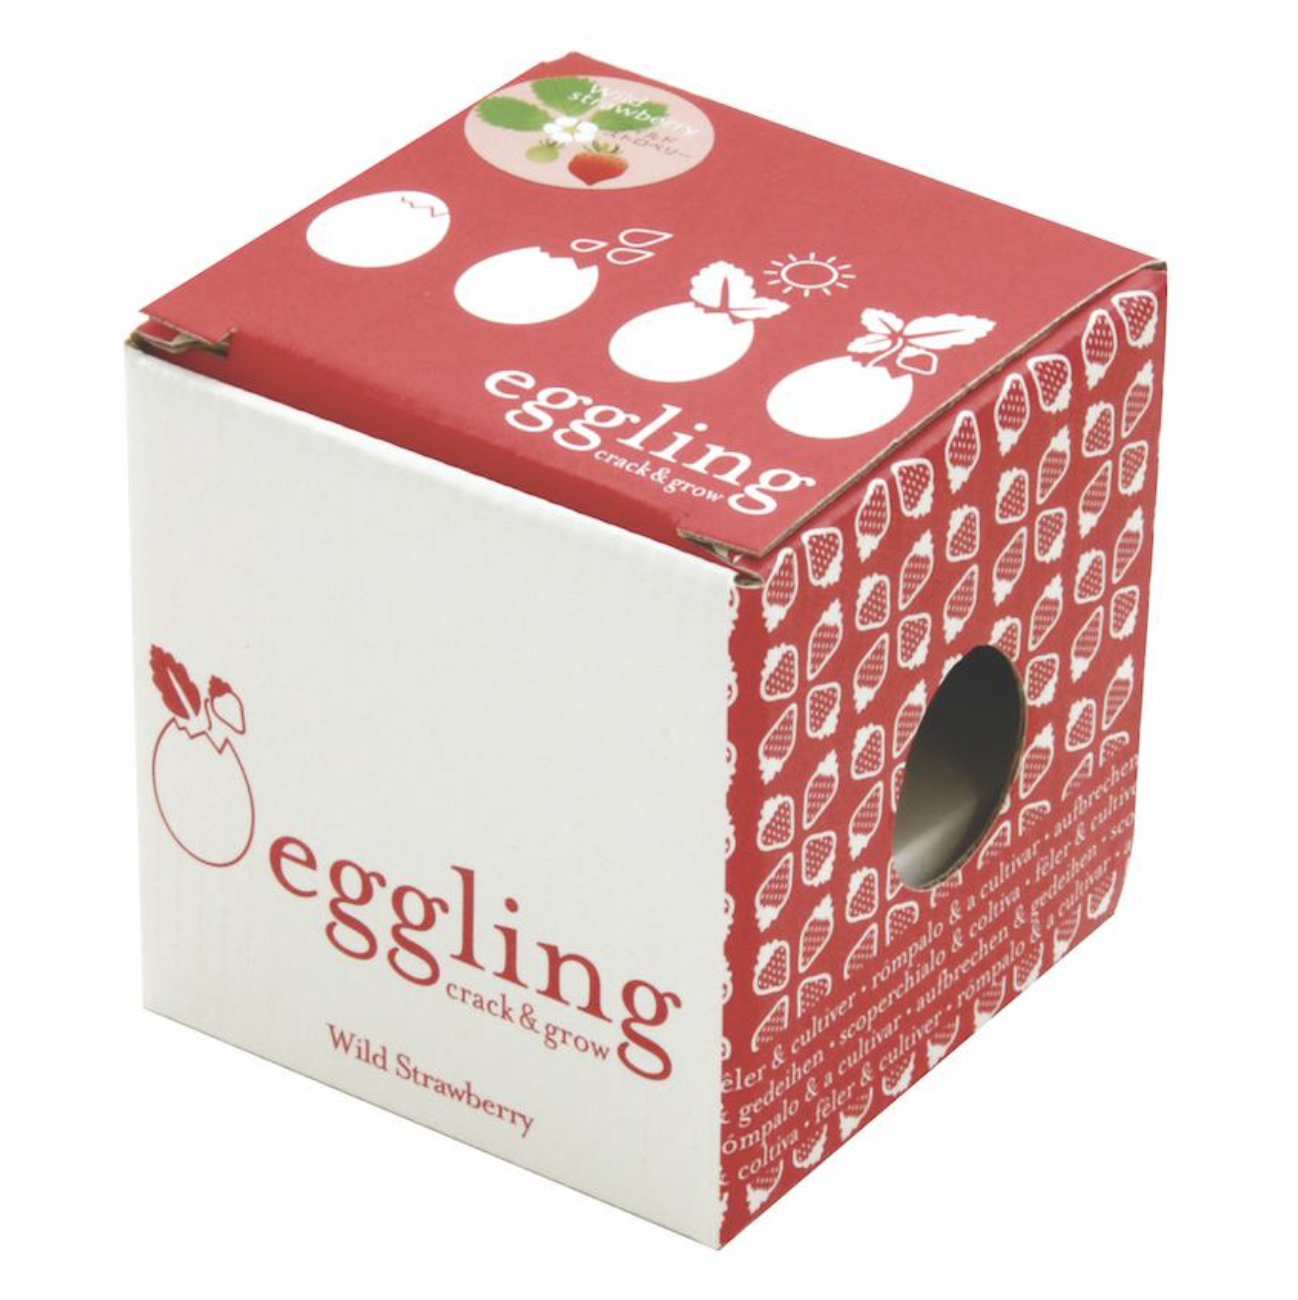 Noted Eggling Crack & Grow - Strawberry